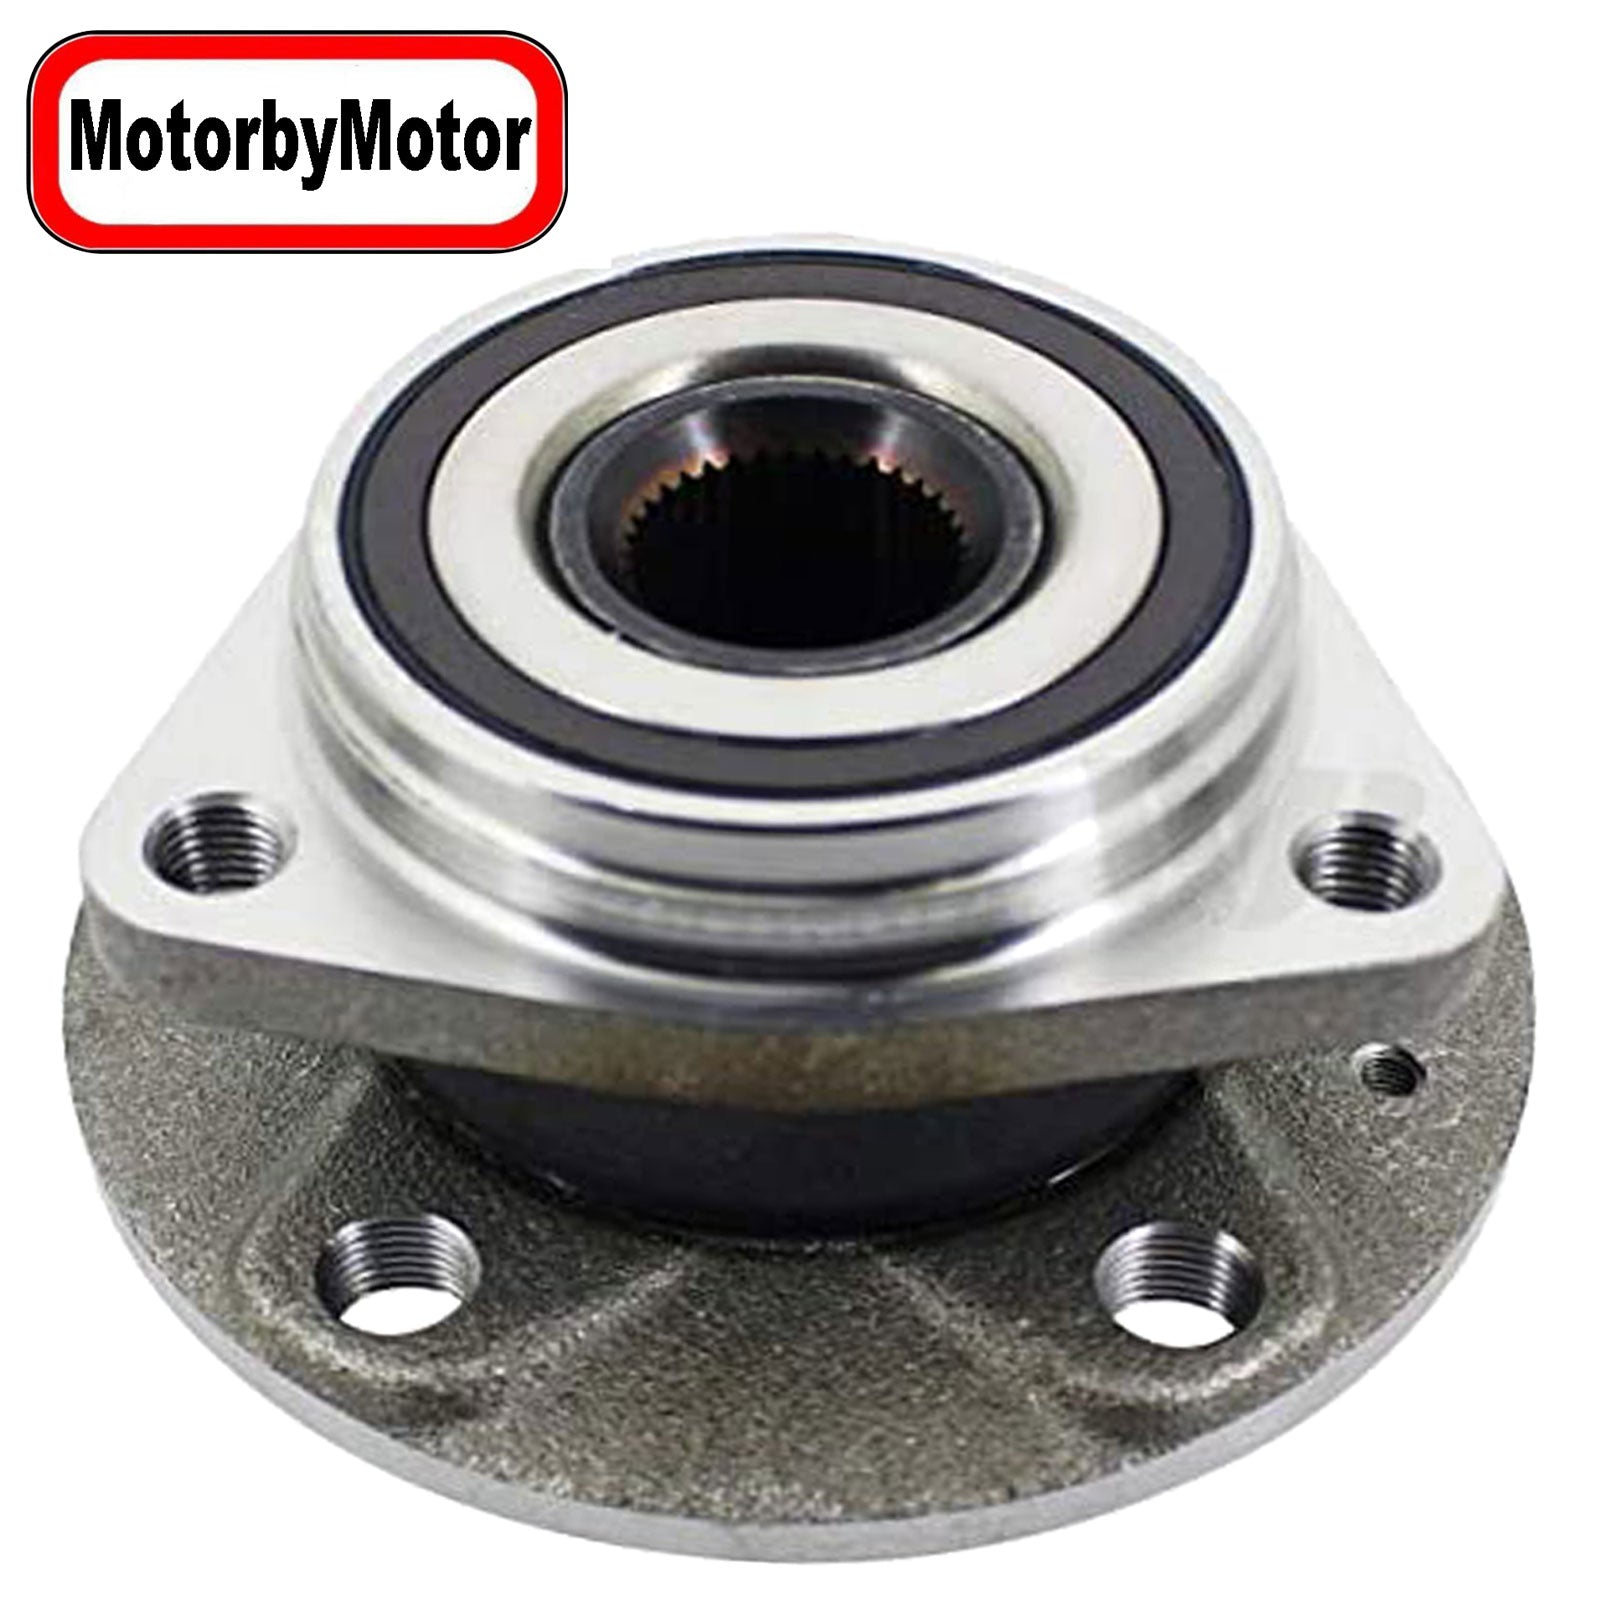 MotorbyMotor Front Wheel Bearing and Hub Assembly Replacement for Audi A3 A3 Sportback E-Tron Q3 S3 TT TT RS Quattro TTS Quattro, for Volkswagen Arteon Golf GTI Jetta Tiguan Hub Bearing-513379 MotorbyMotor